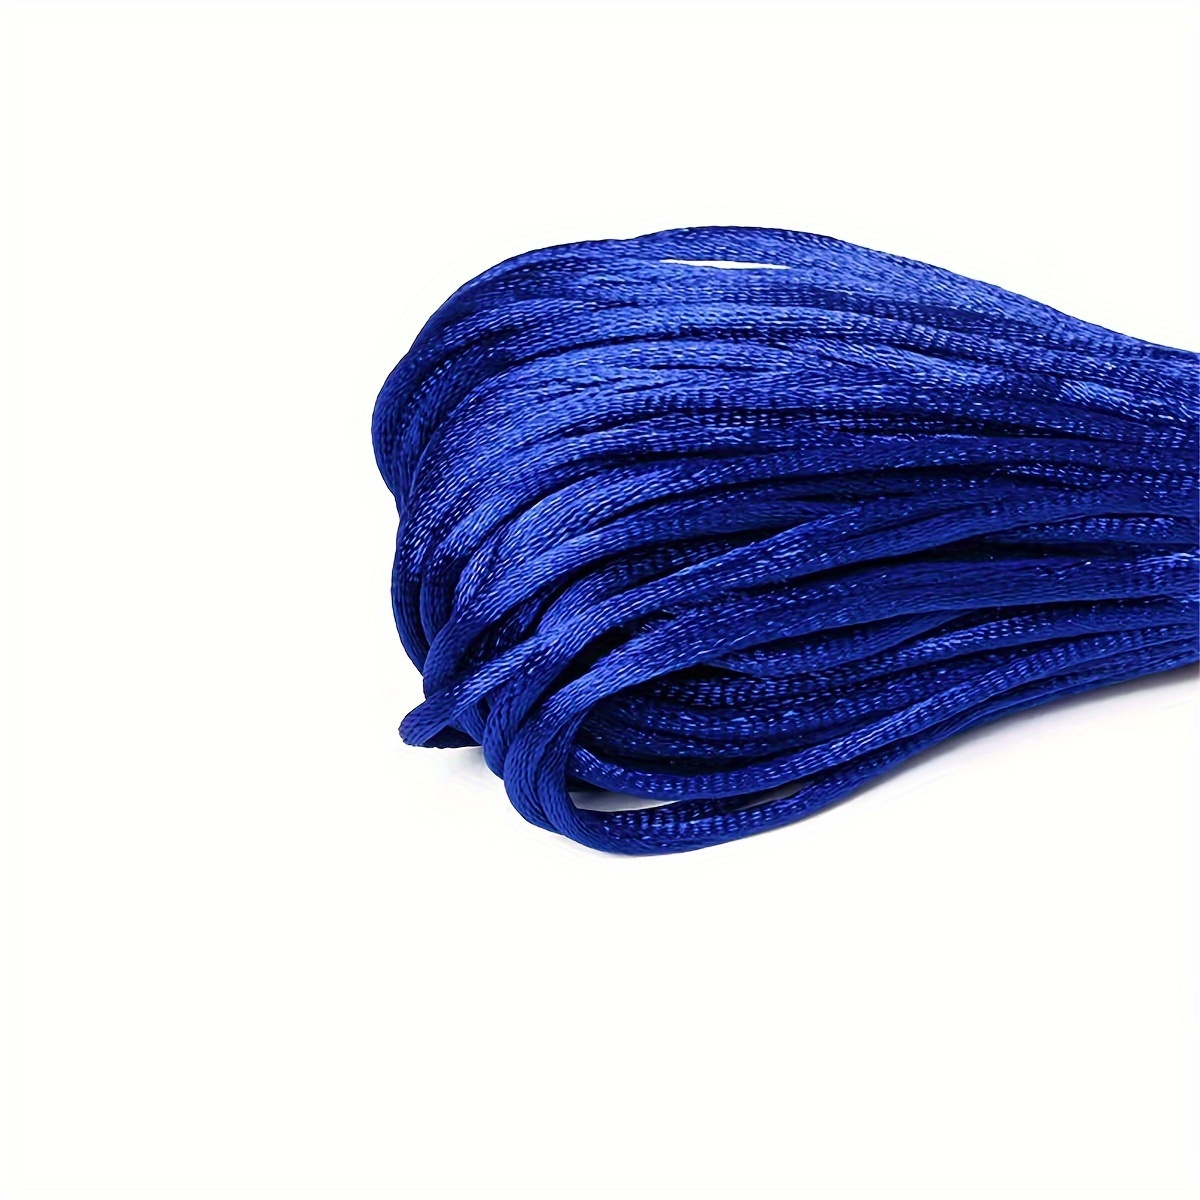 1.5 mm Nylon Satin Cord Beading Braided Thread String for Macrame Bracelets  Chinese Knotting,Necklaces,Jewelry Making 